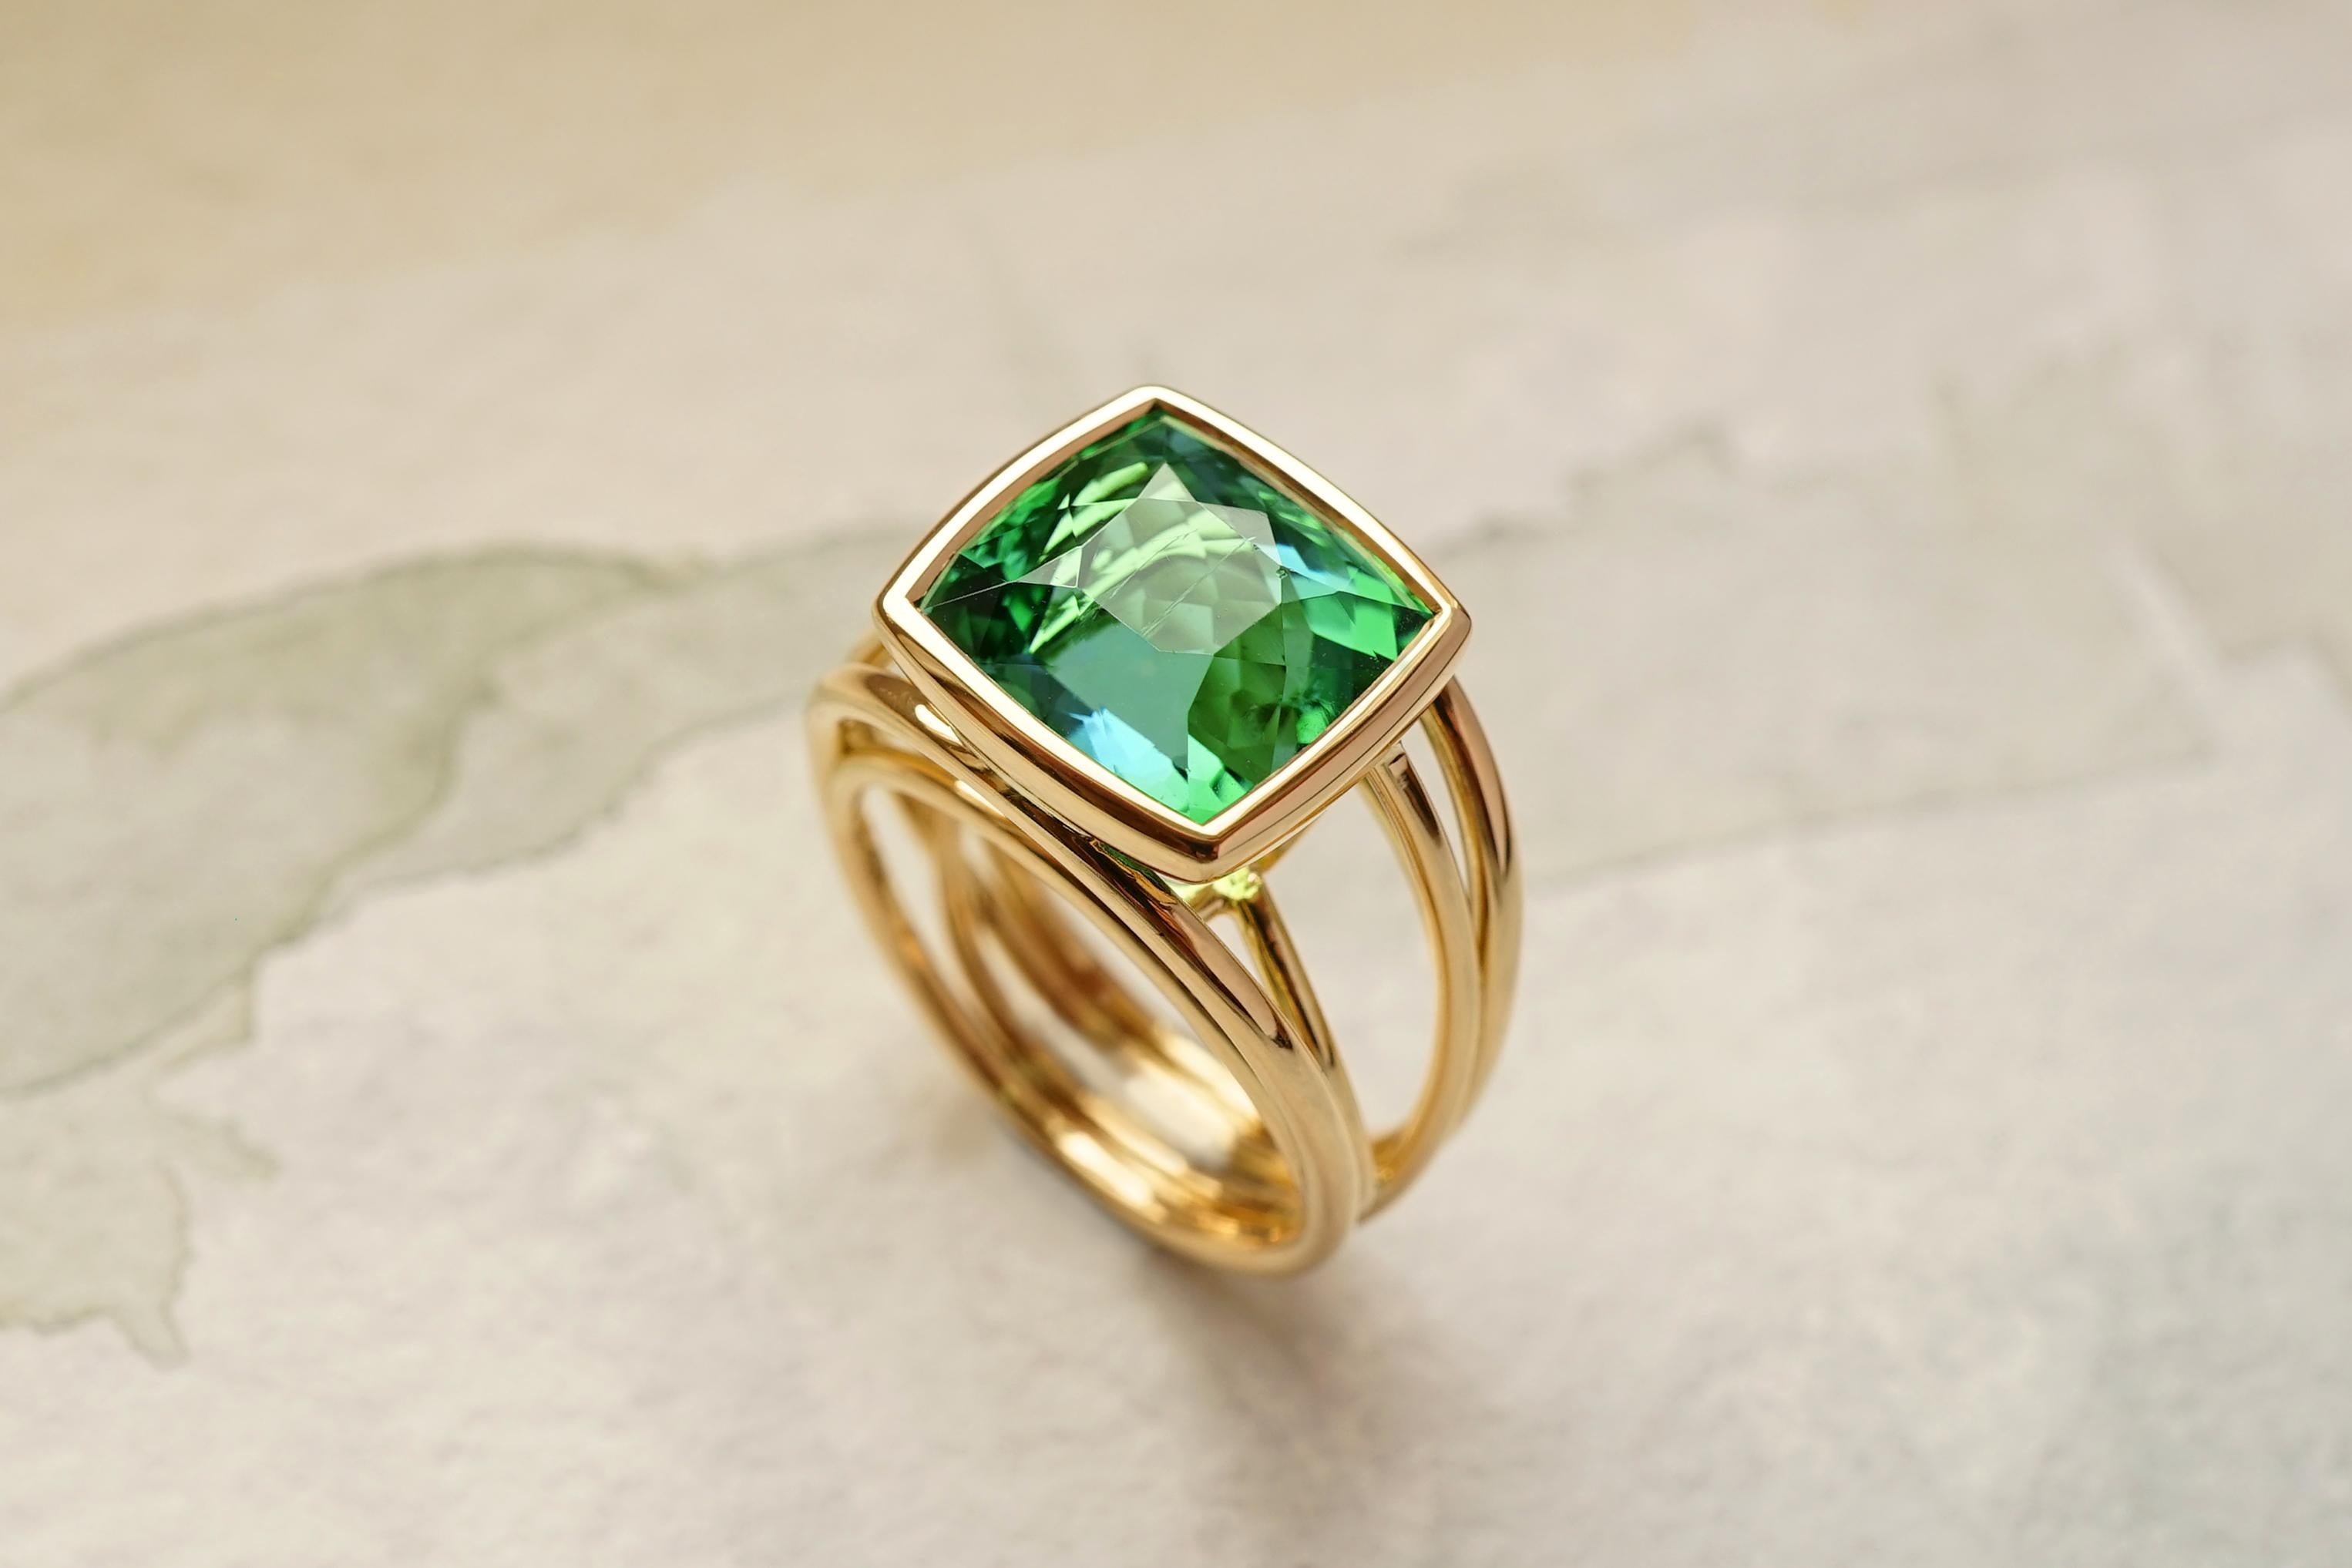 Coralie van Caloens 18k Yellow Gold Cord Band Ring And Green Tourmaline is entirely hand made and forged in Belgium by experts goldsmiths therefore it is a very unique piece. The fluidity of cords give the ring a feminine, contemporary and elegant